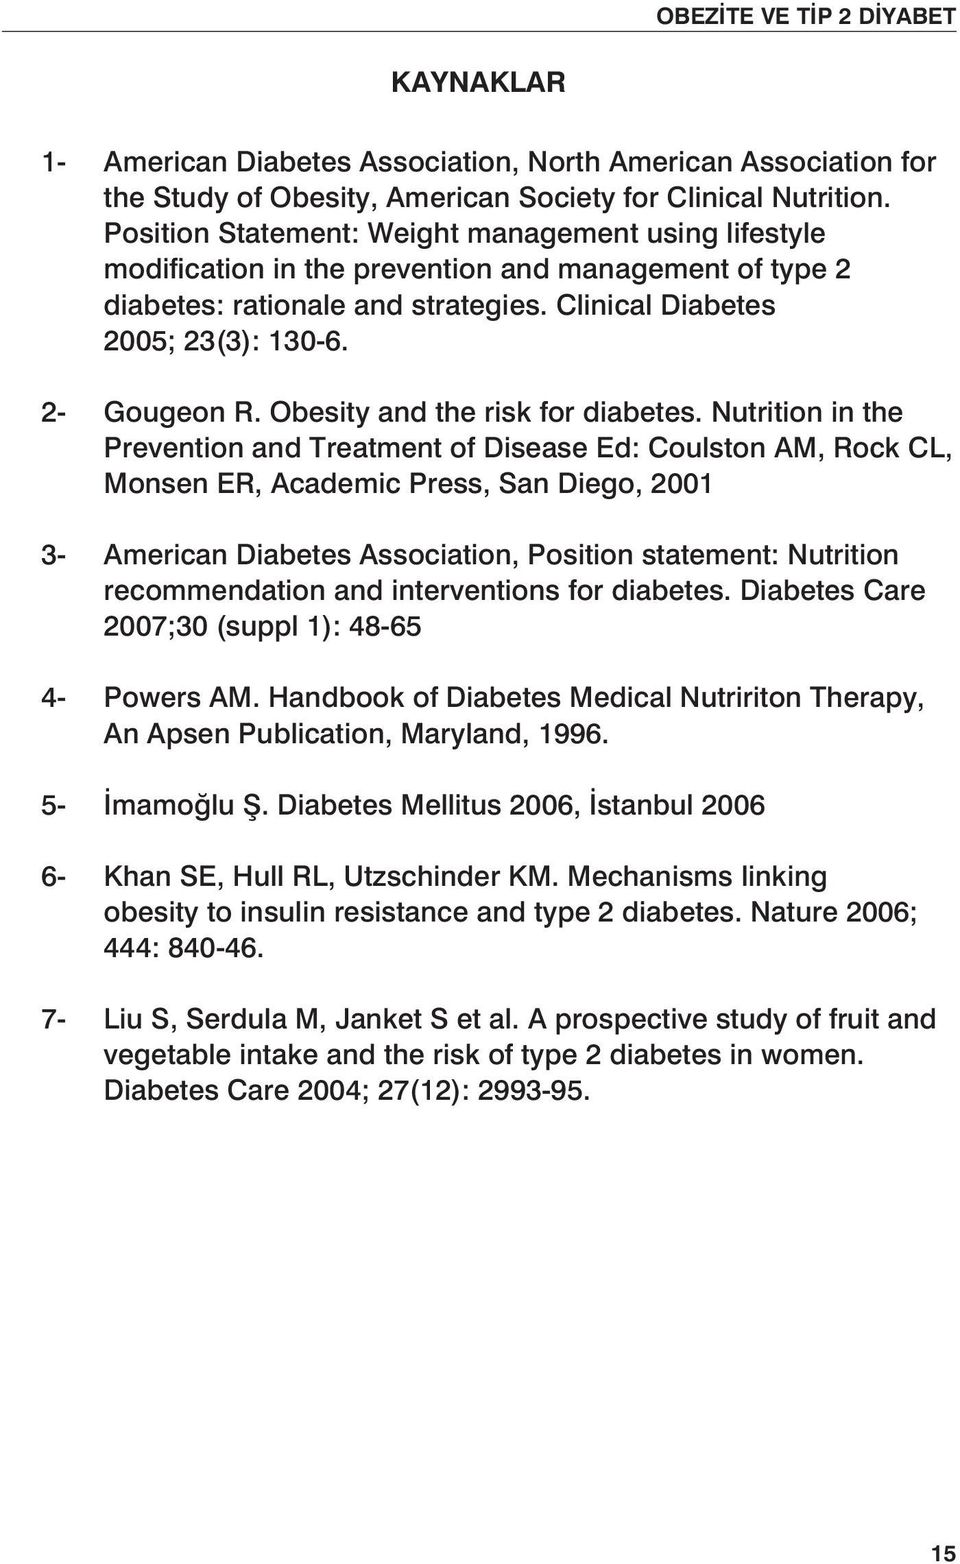 Obesity and the risk for diabetes.